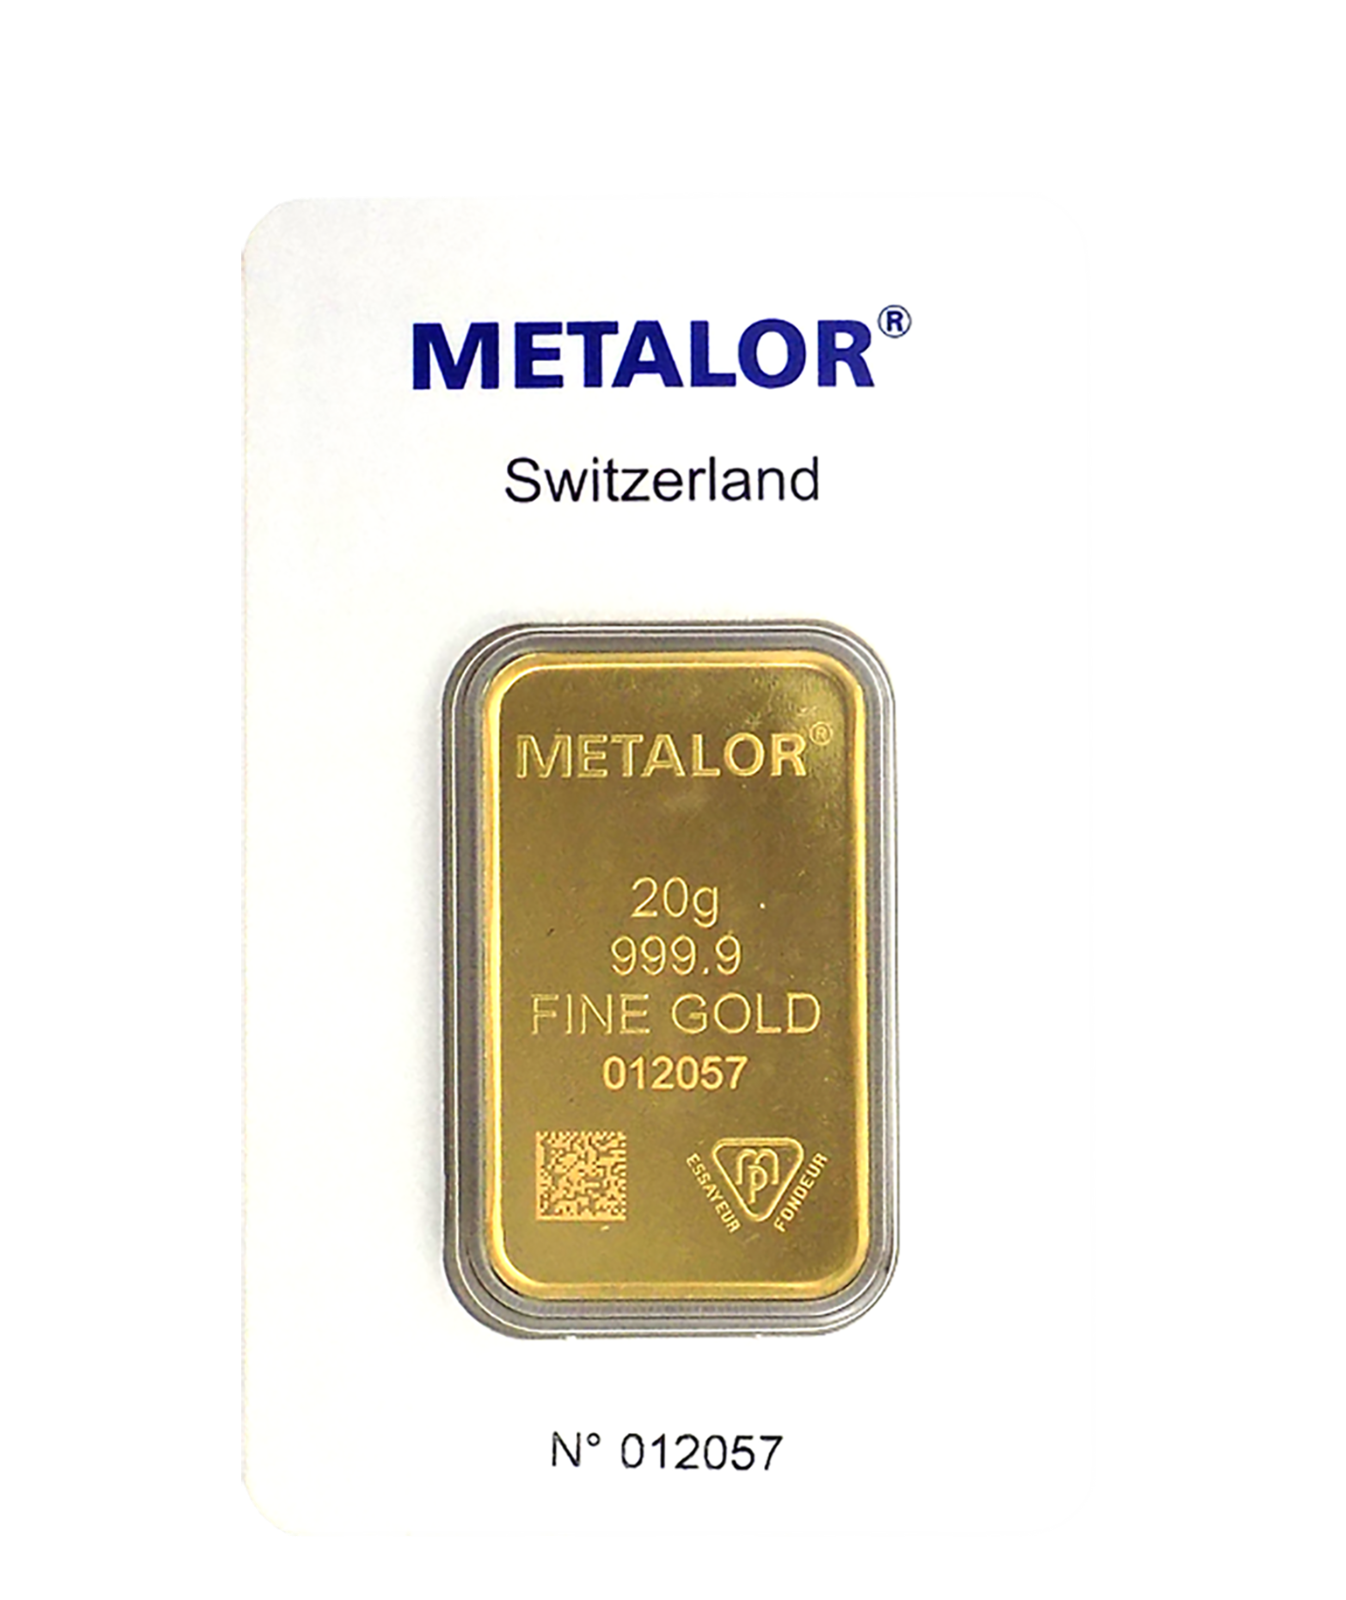 Minted gold bar